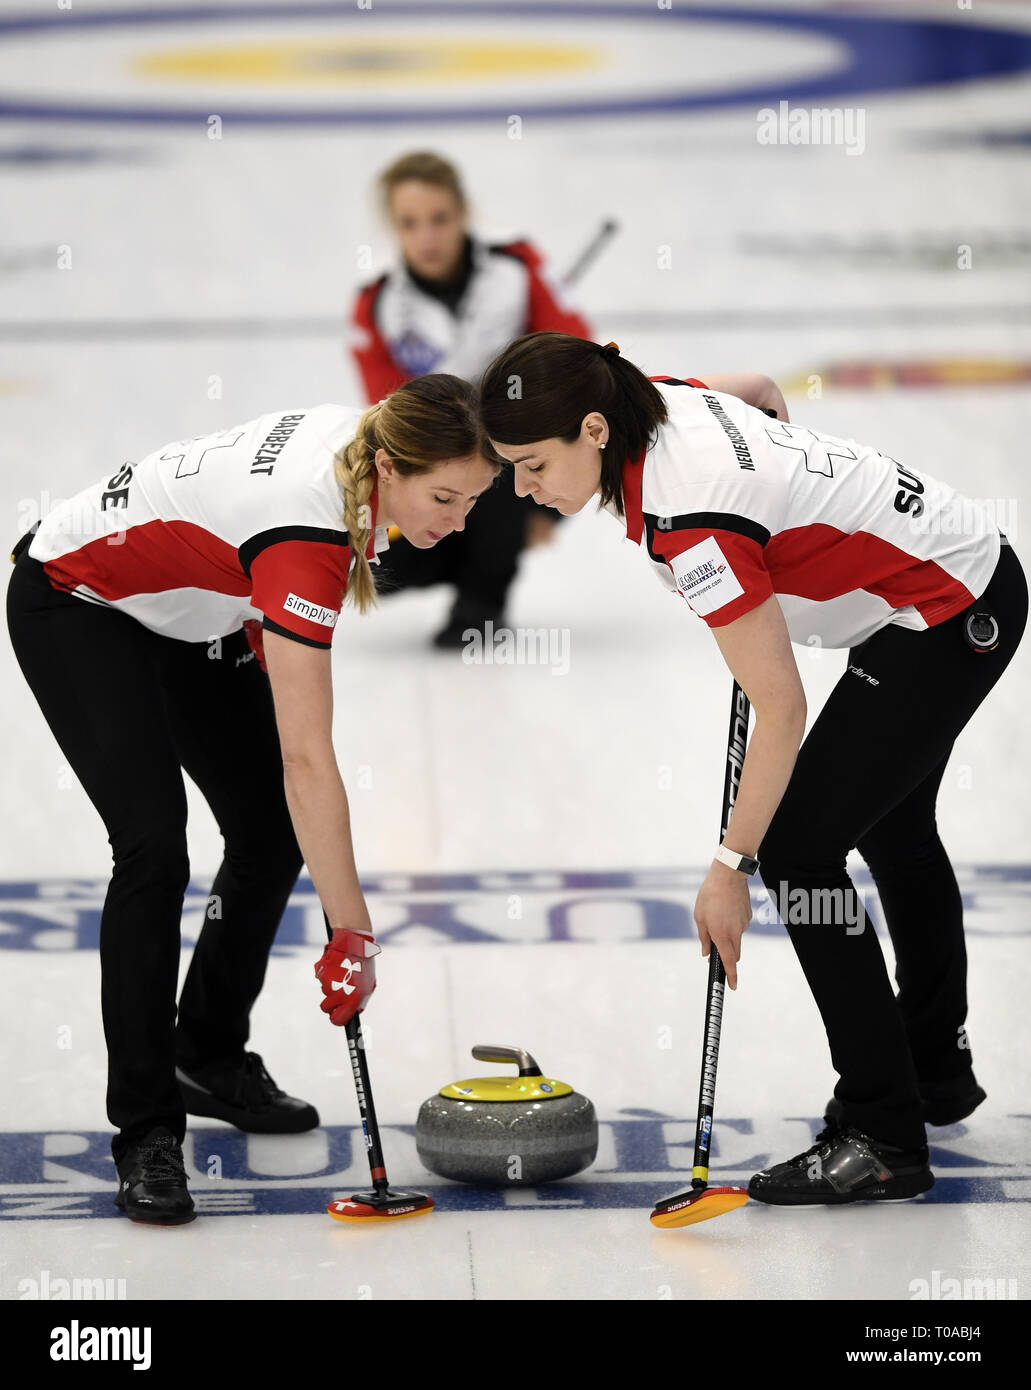 March 19, 2019 - Silkeborg, Denmark - Team Switzerland in action during the Round Robin curling match between Korea and Switzerland in the LGT World Women's Curling Championship 2019 in Silkeborg, Denmark. (Credit Image: © Lars Moeller/ZUMA Wire) Stock Photo